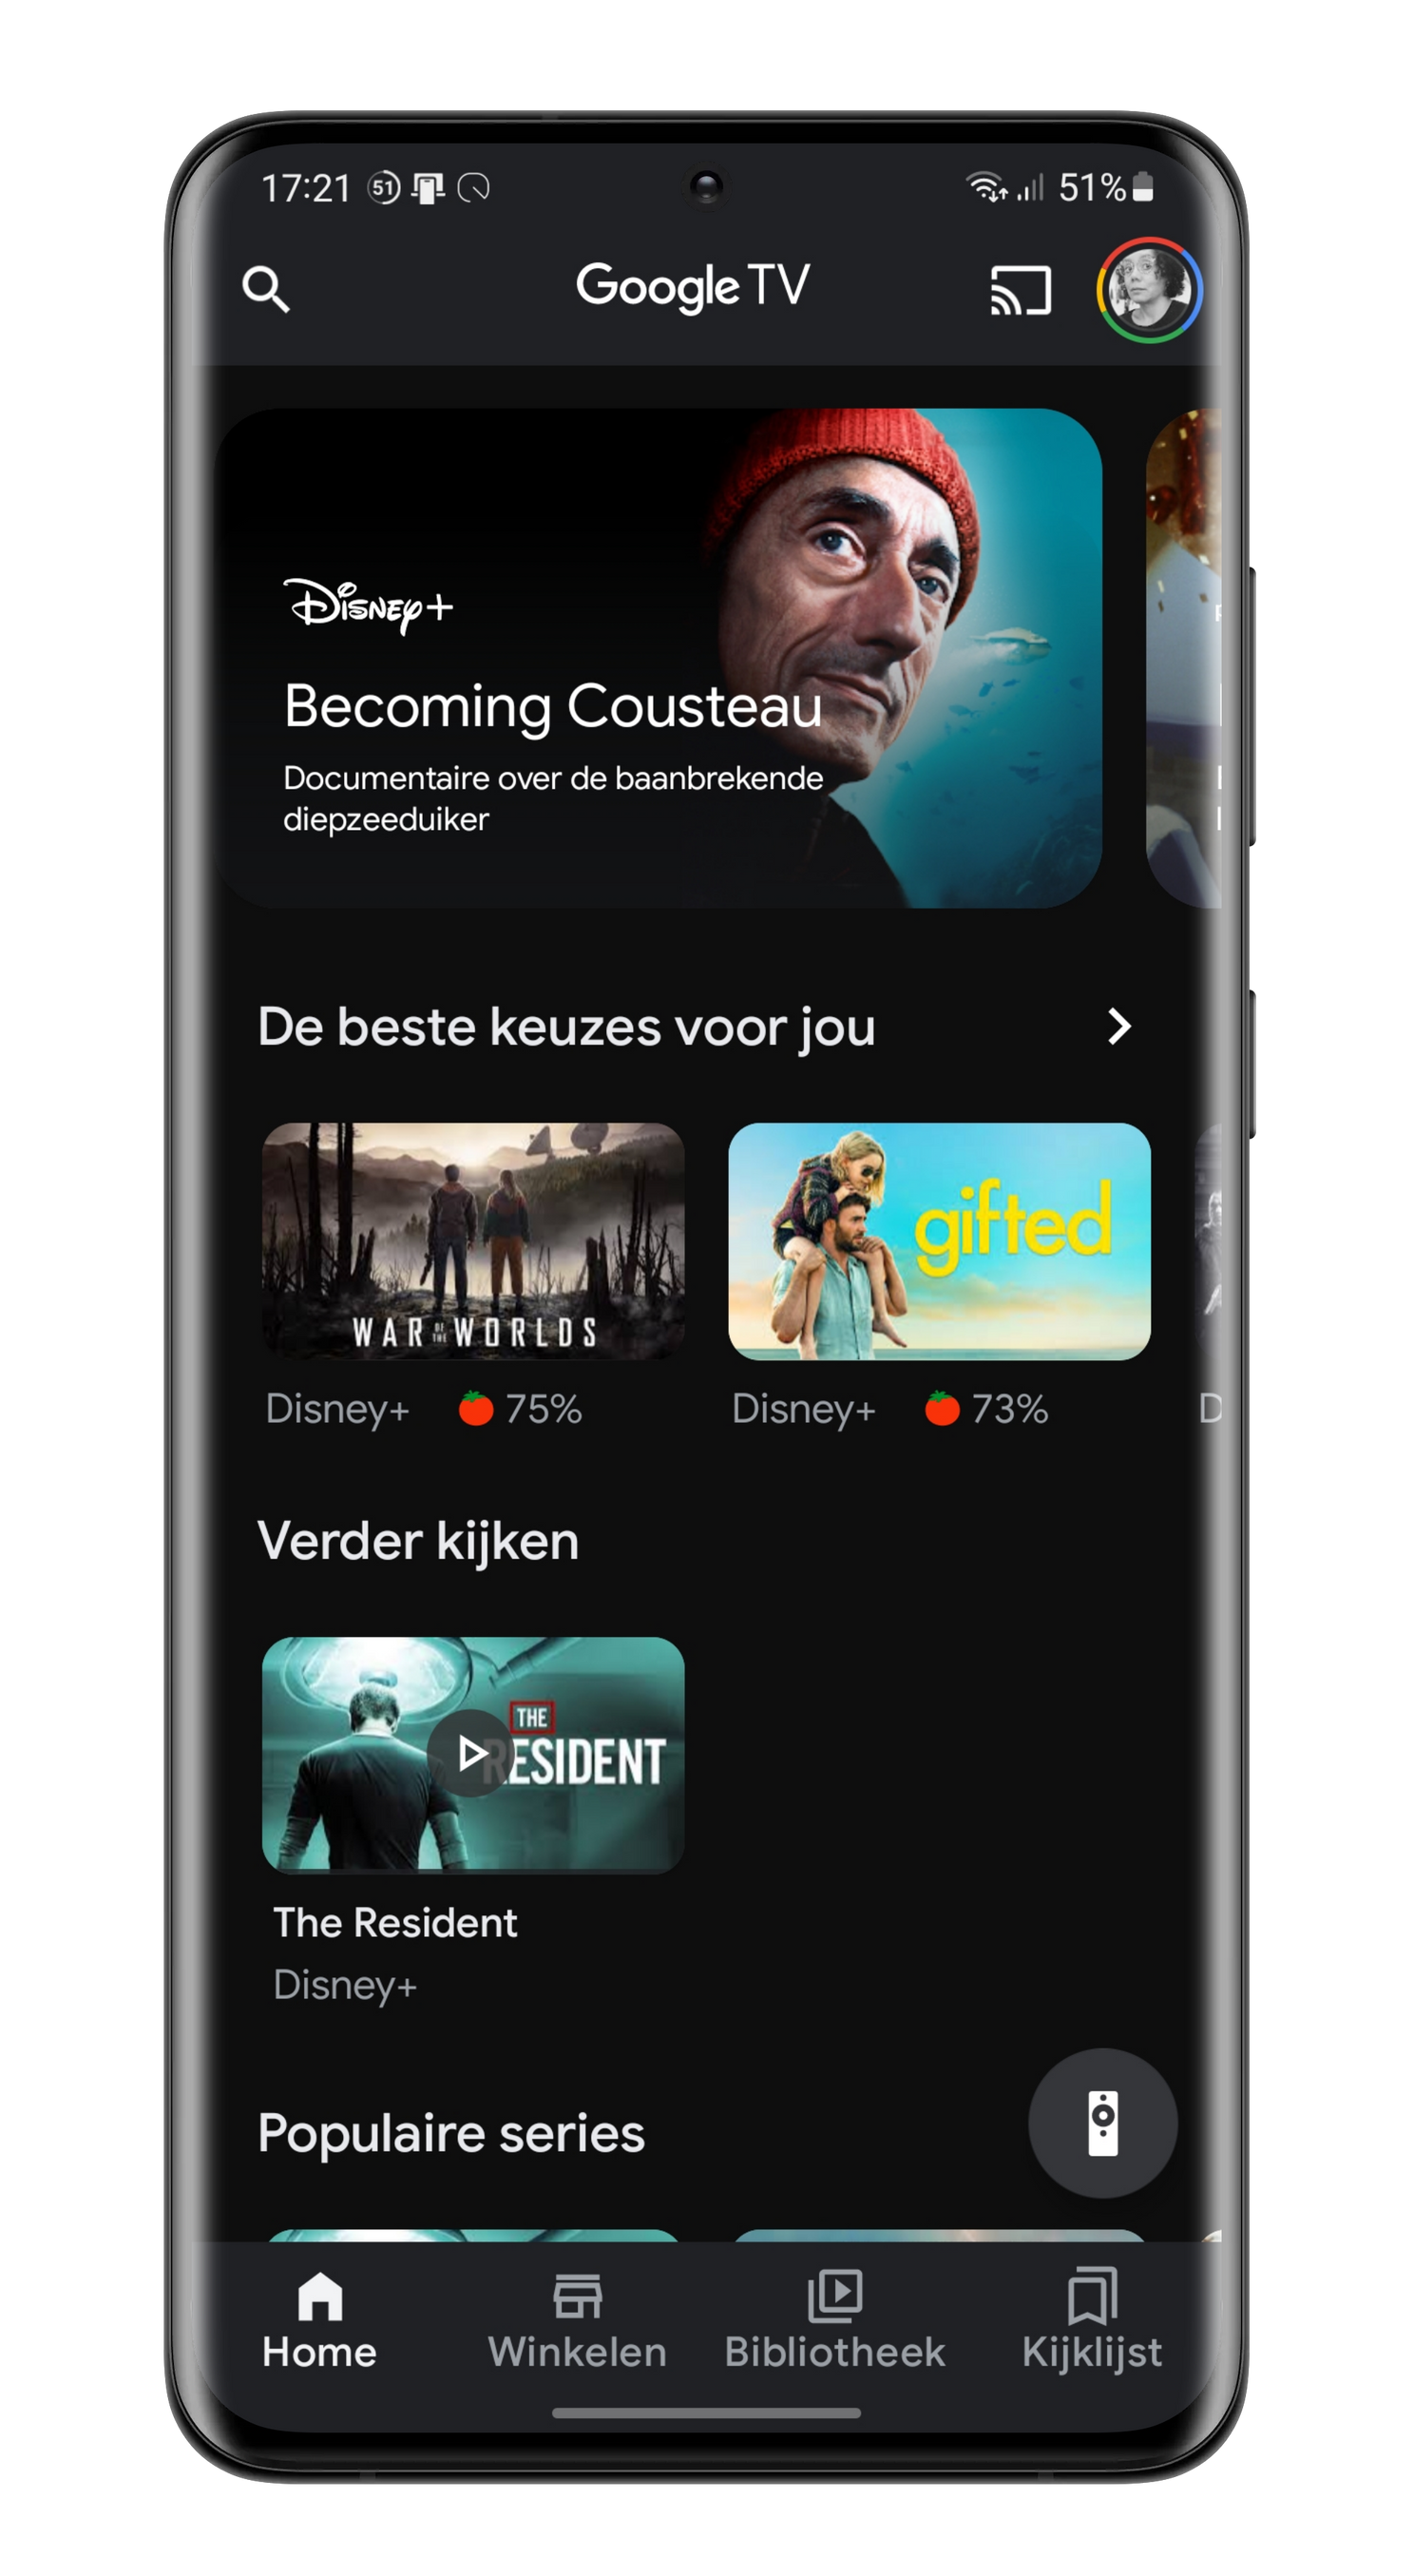 The Google TV app is available in the Netherlands: this is changing for you